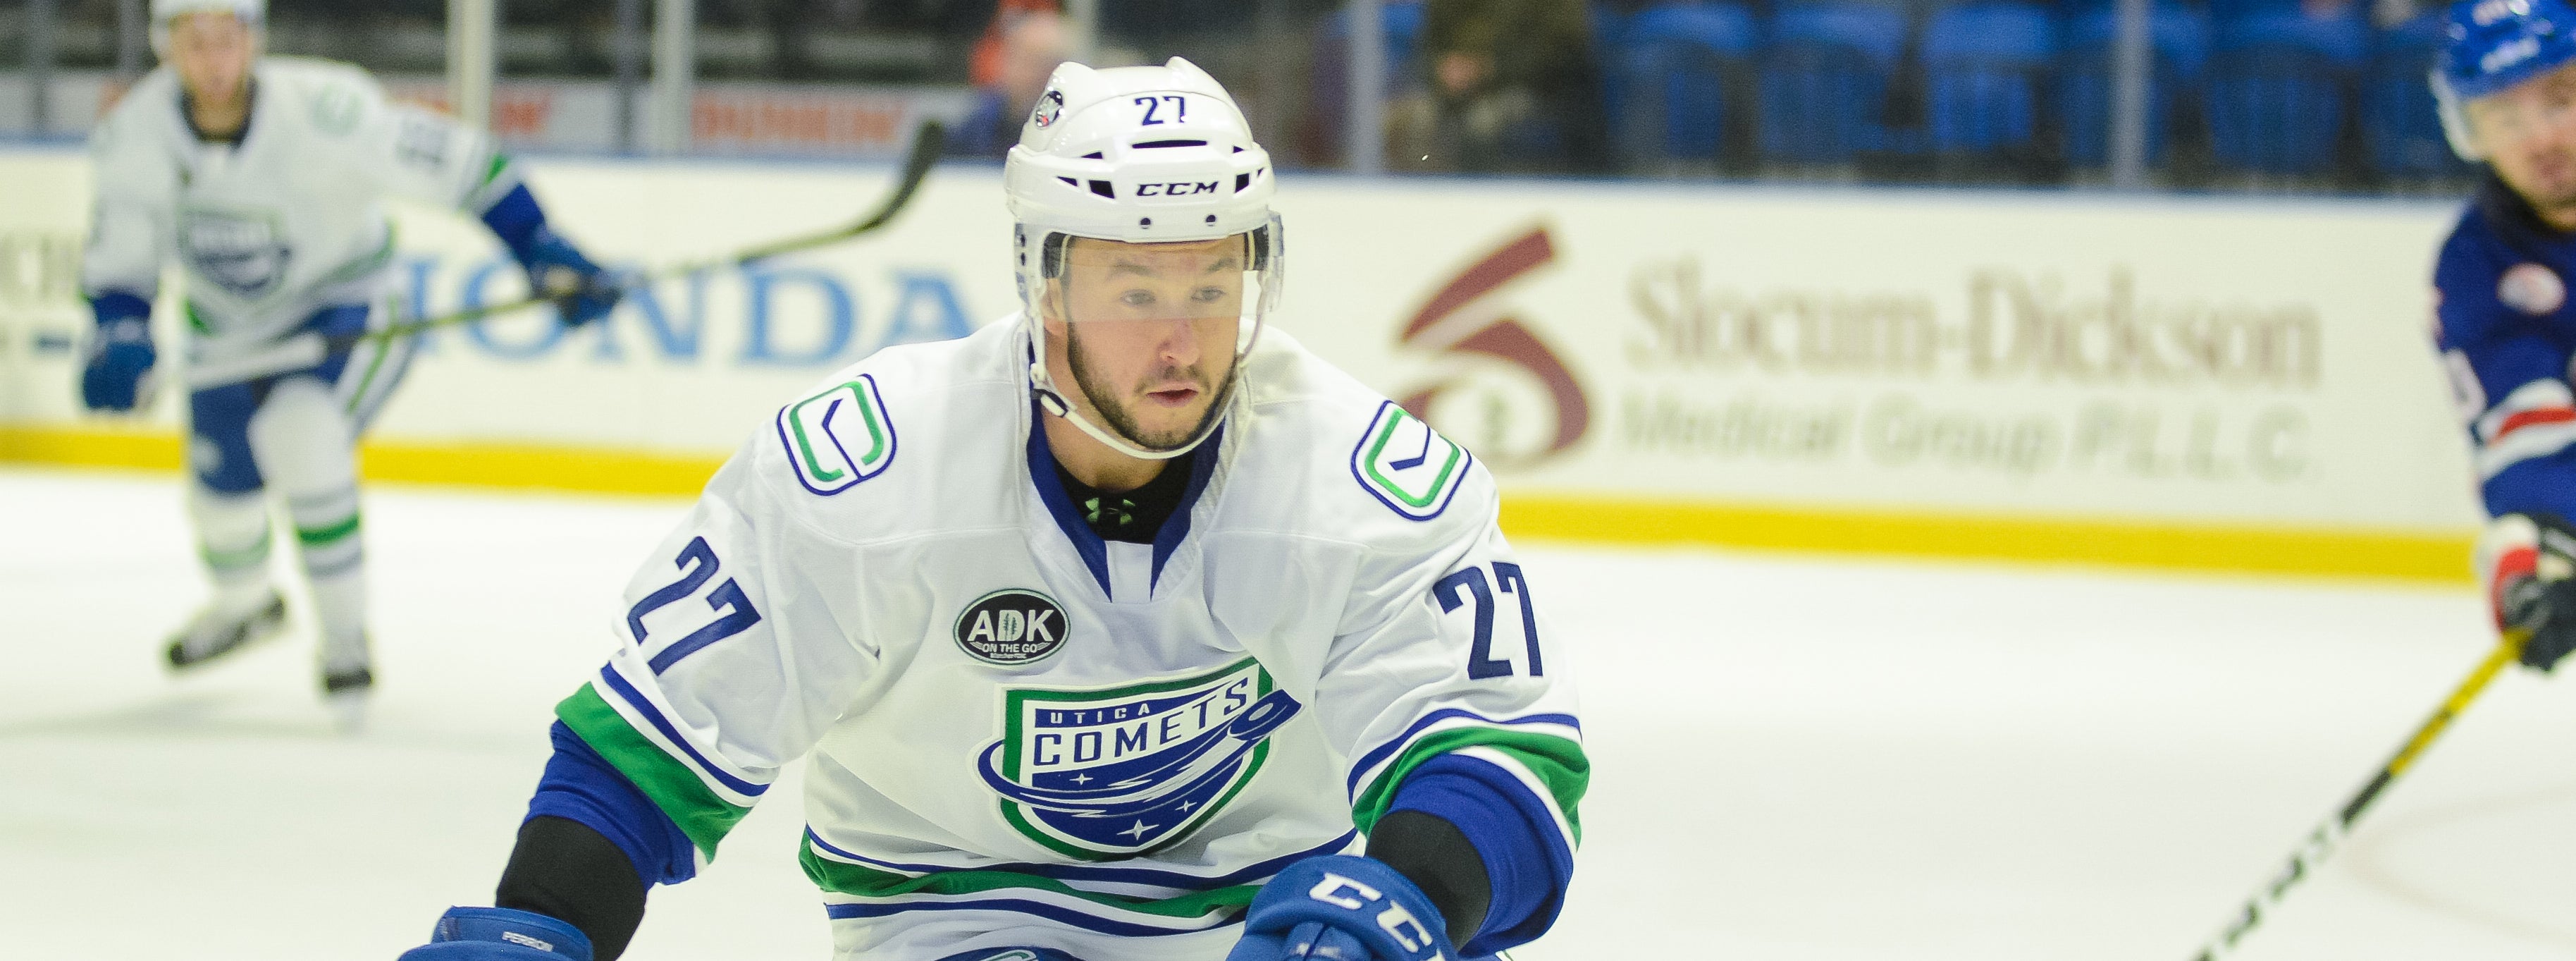 COMETS BATTLE AMERKS FOR SECOND TIME IN A WEEK